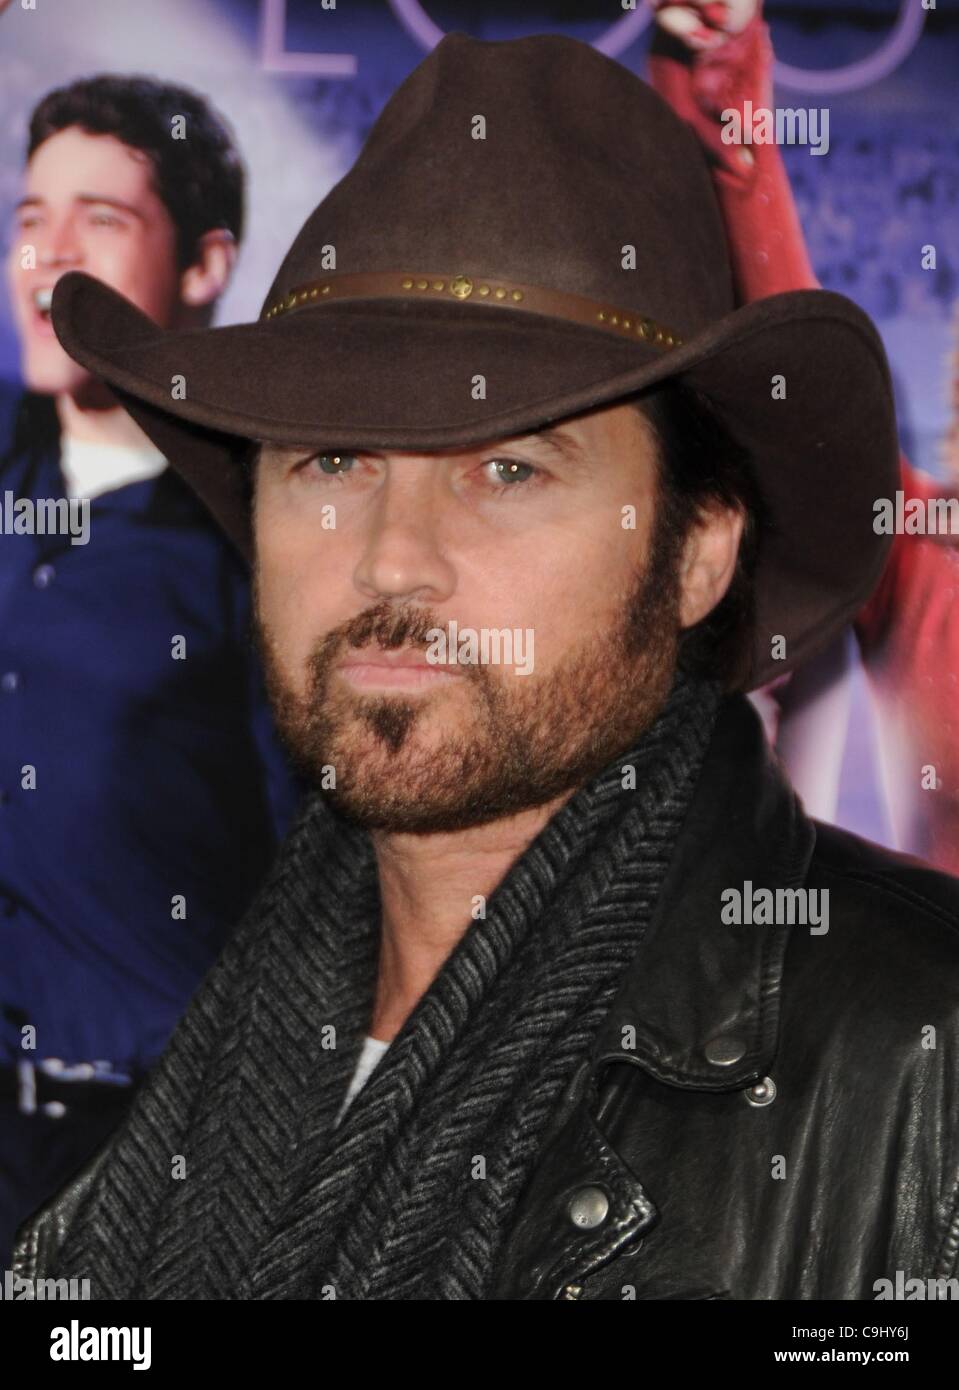 Billy Ray Cyrus at arrivals for JOYFUL NOISE Premiere, Grauman's Chinese Theatre, Los Angeles, CA January 9, 2012. Photo By: Dee Cercone/Everett Collection Stock Photo